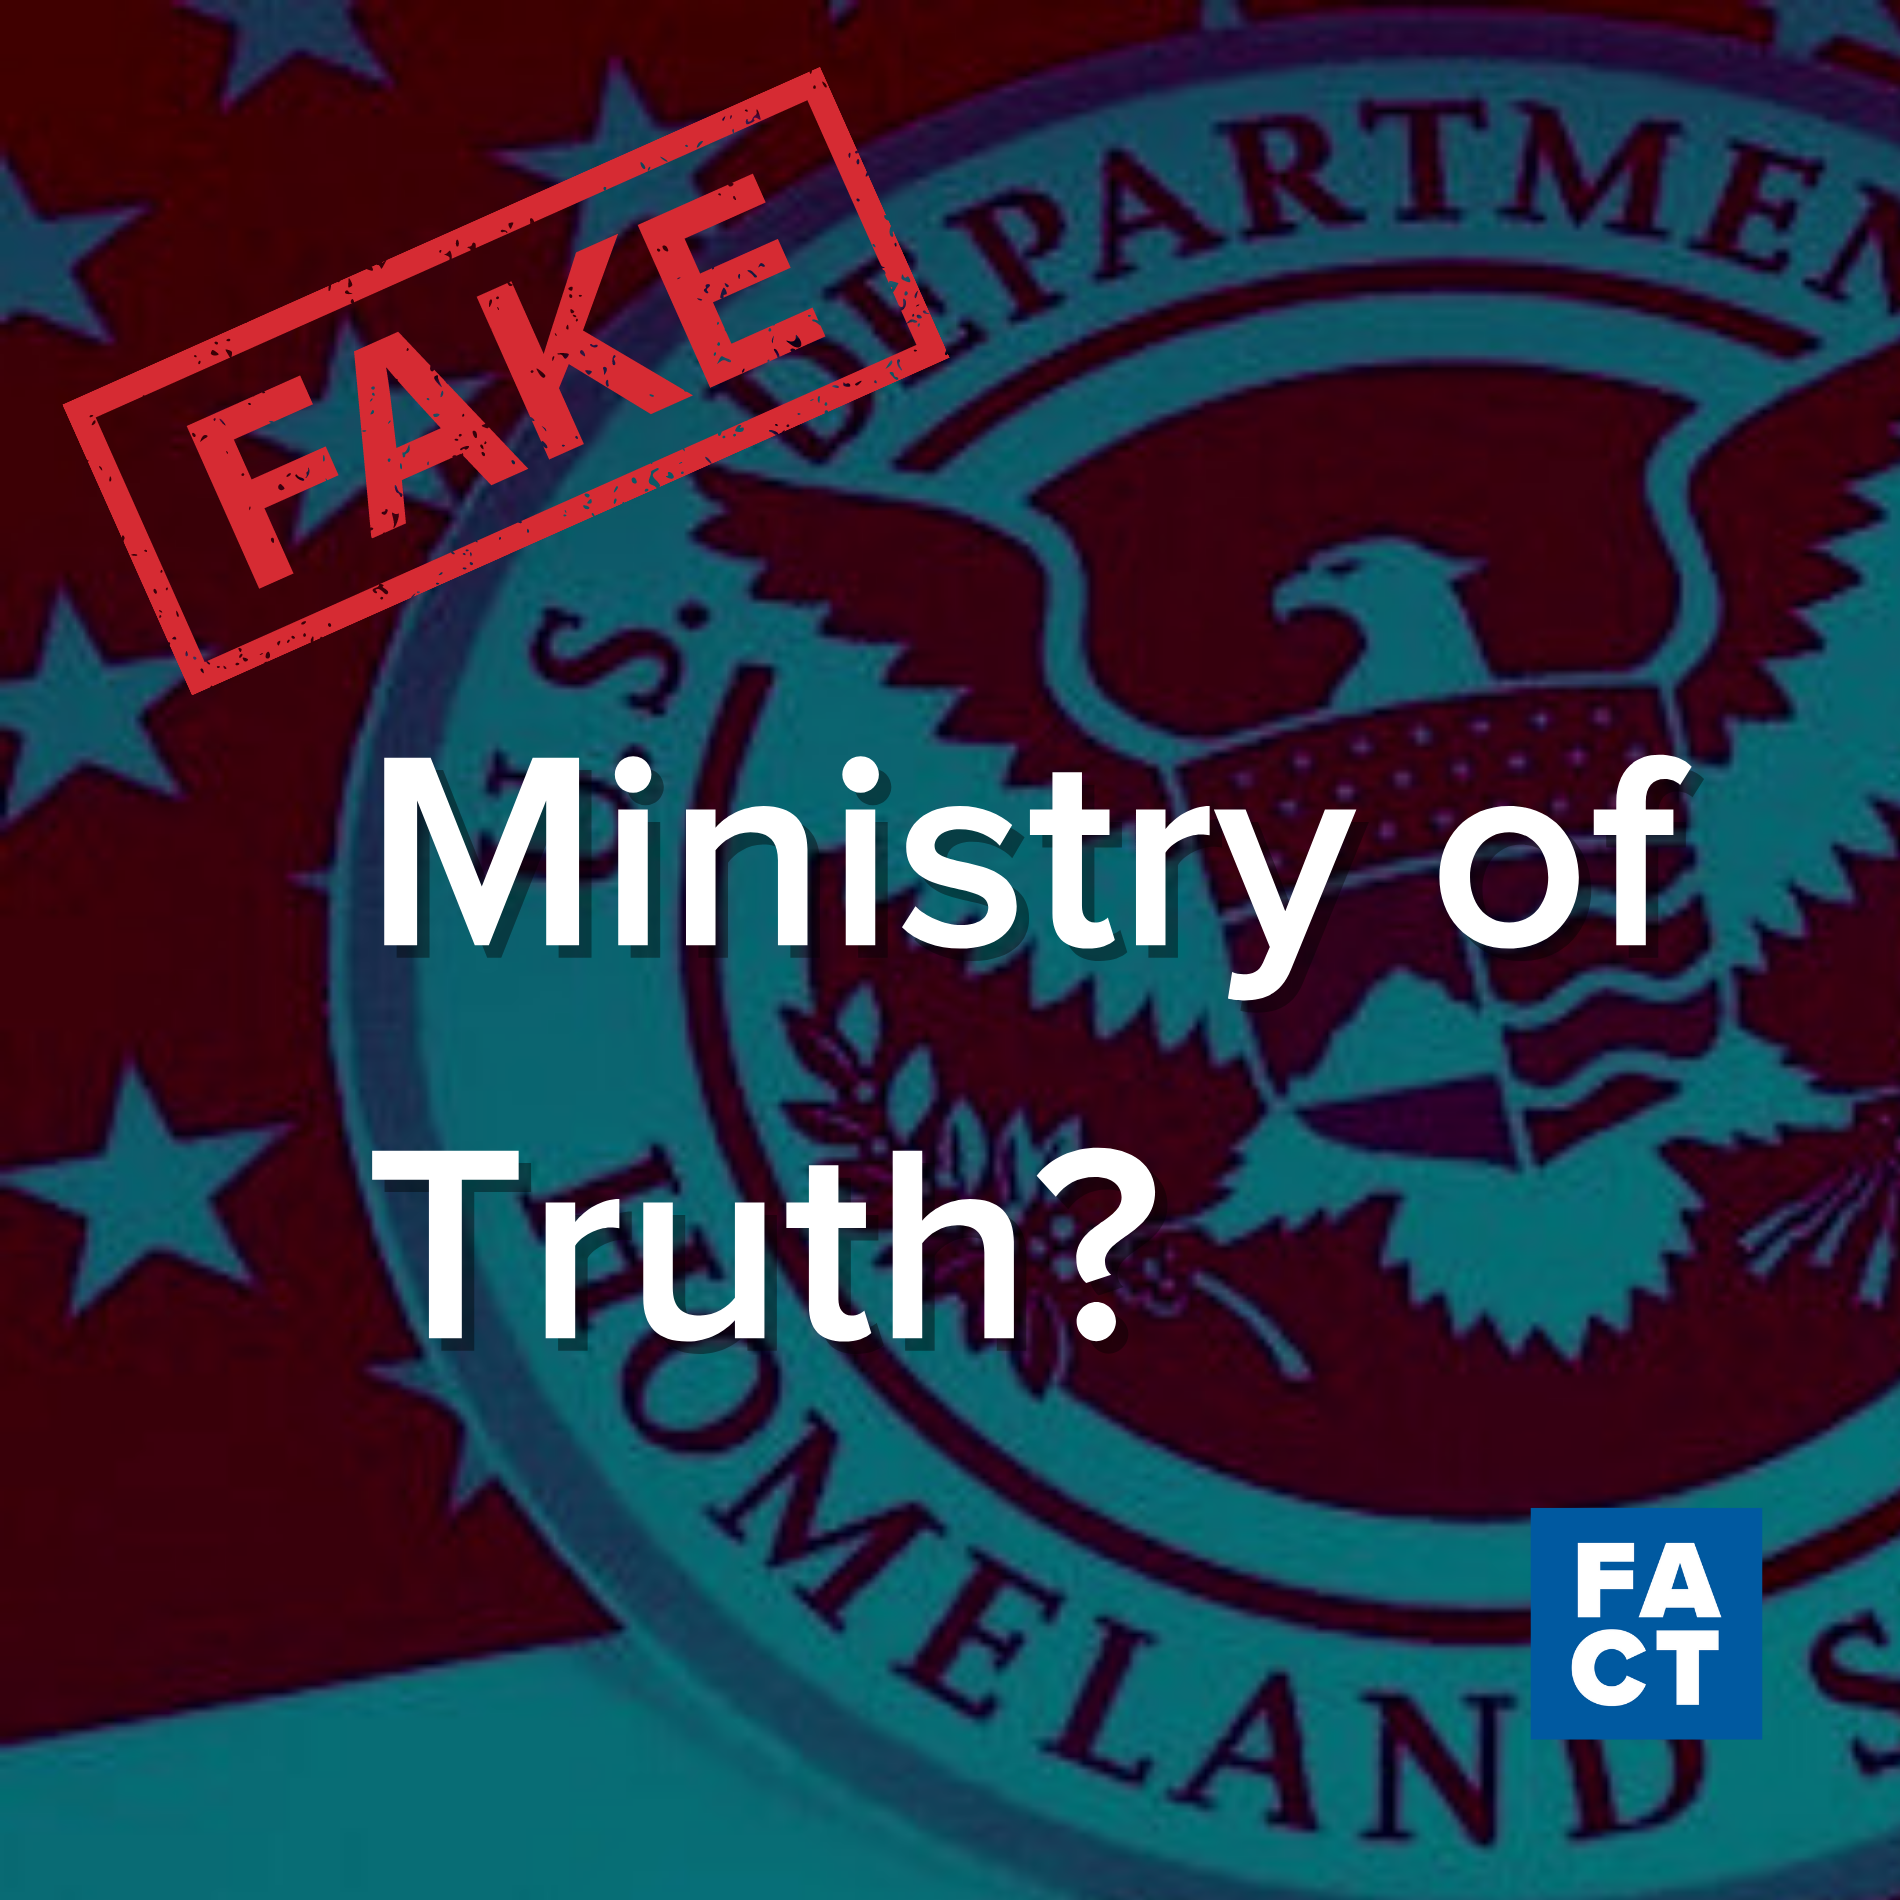 The Ministry of Truth is the Latest False Flag